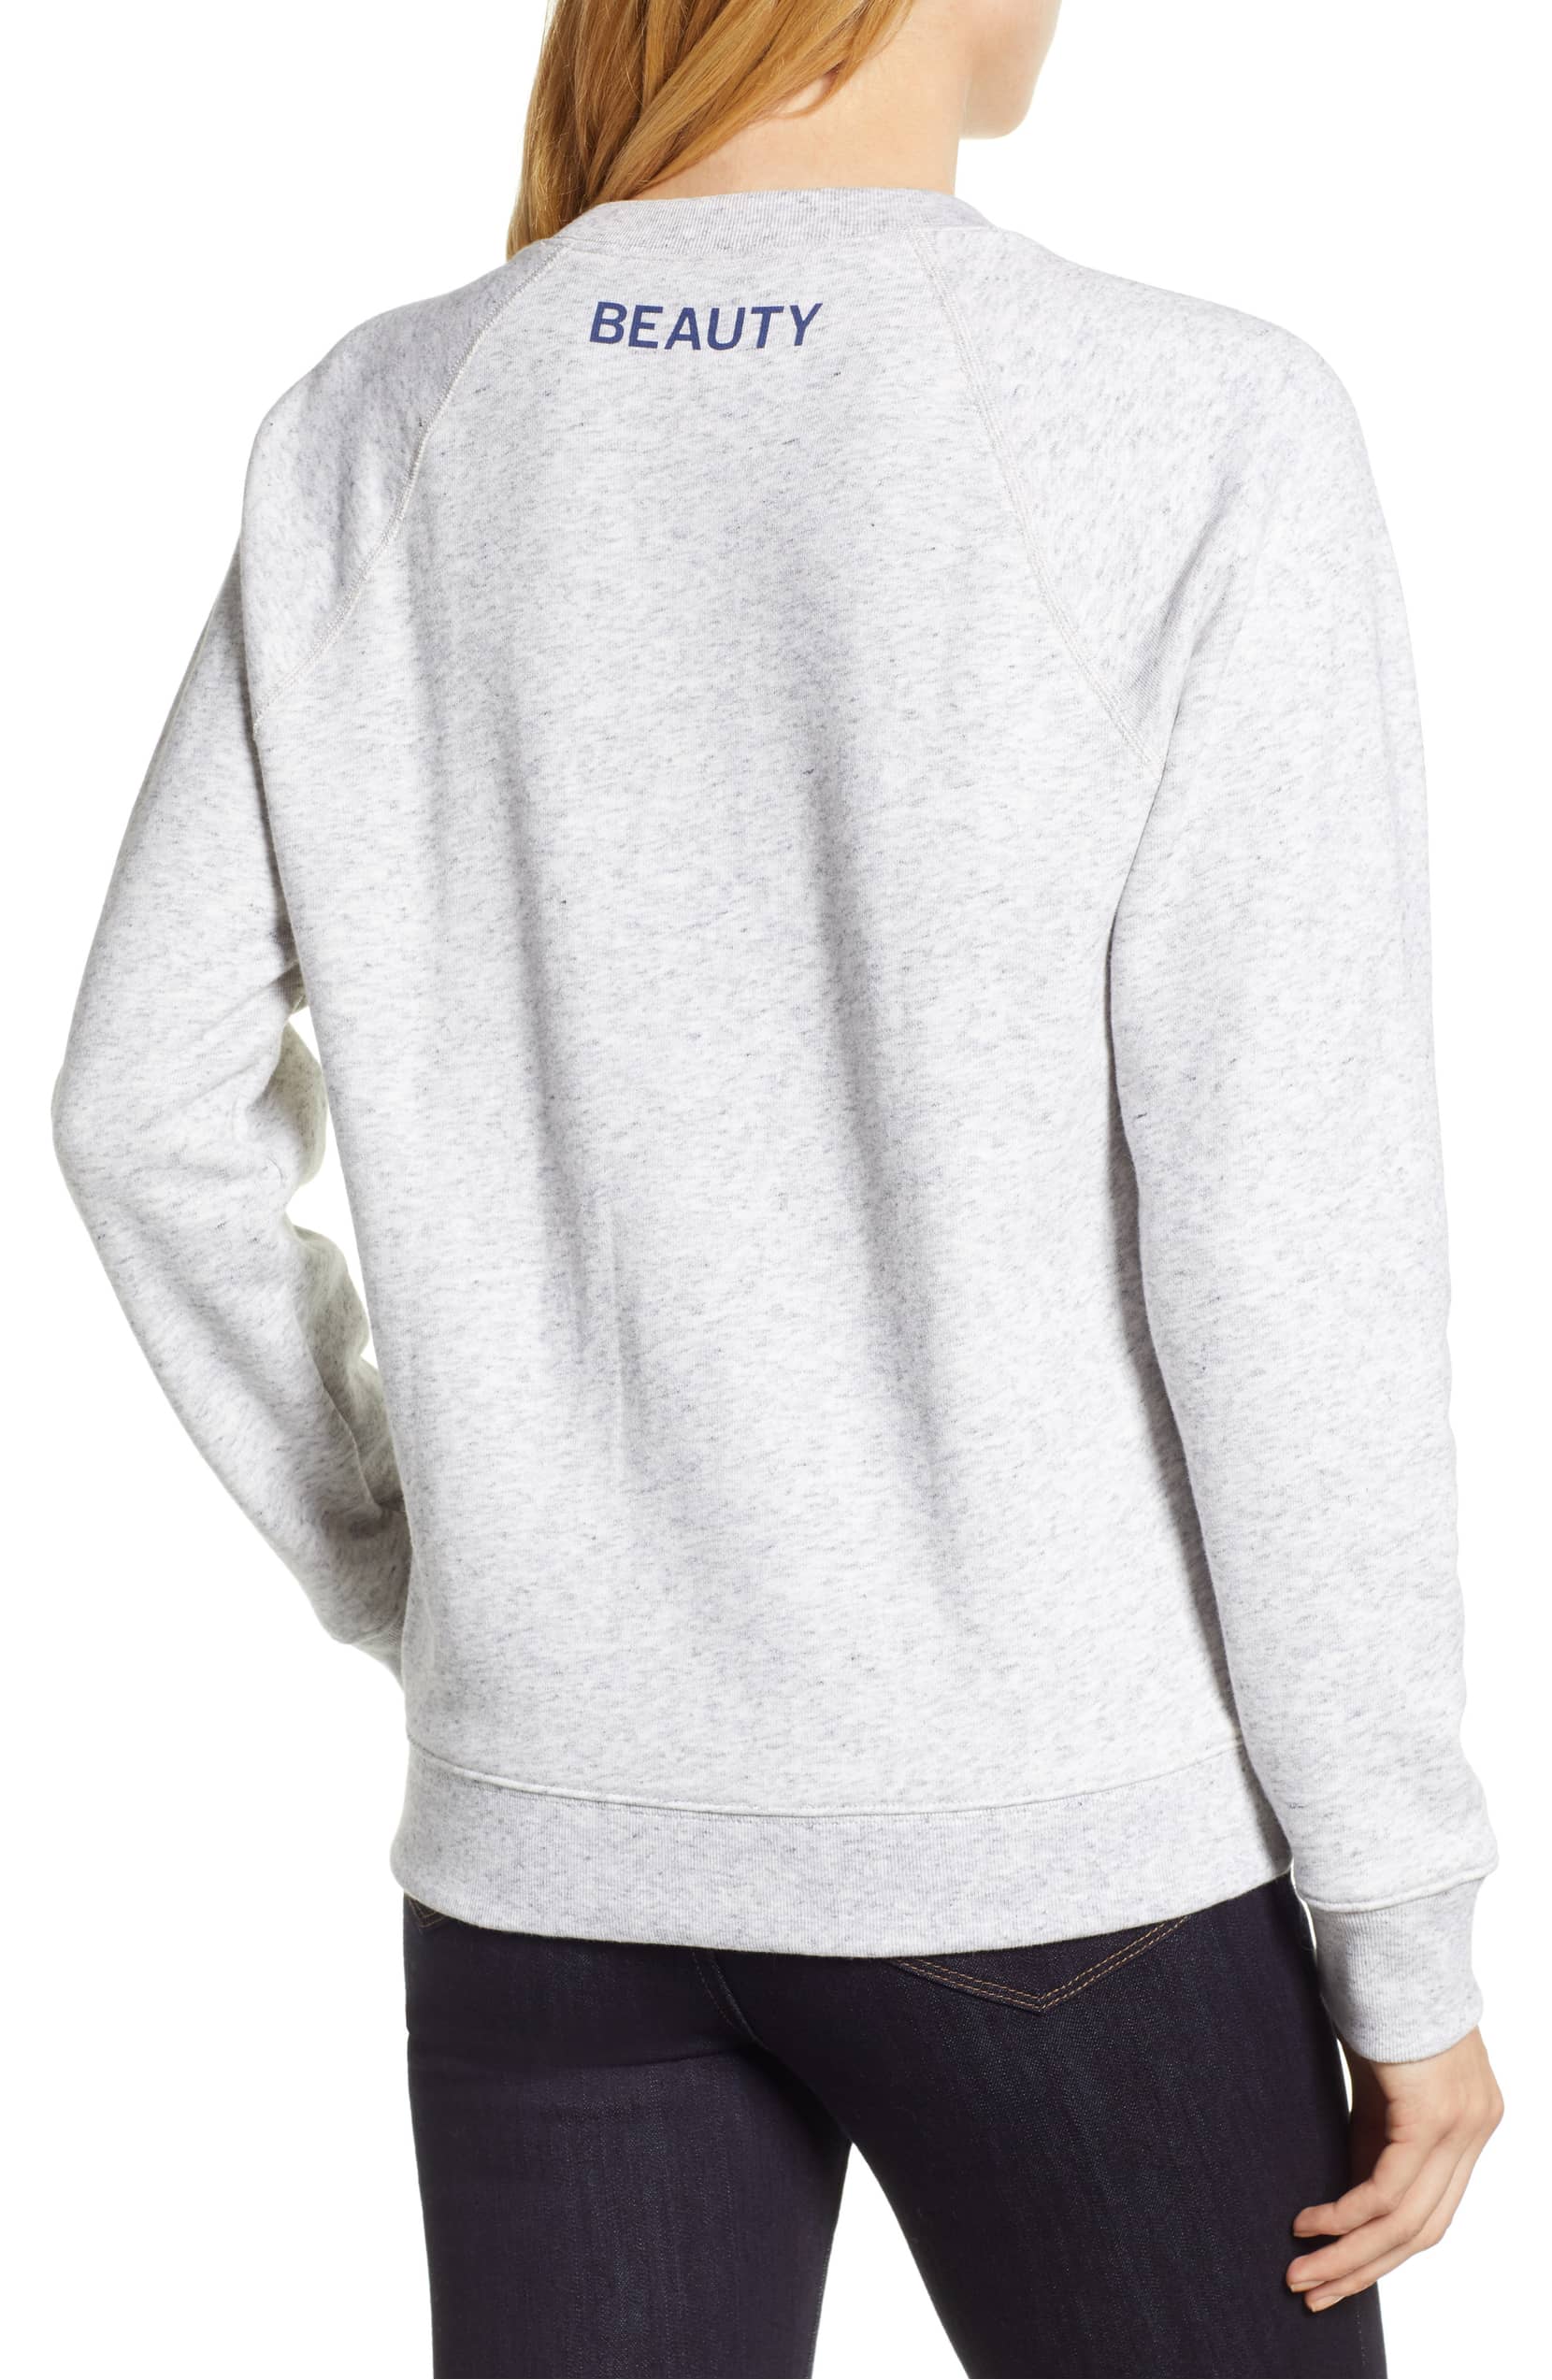 J.Crew Has the Perfect Sweatshirt to Remind Yourself You’re a Beauty